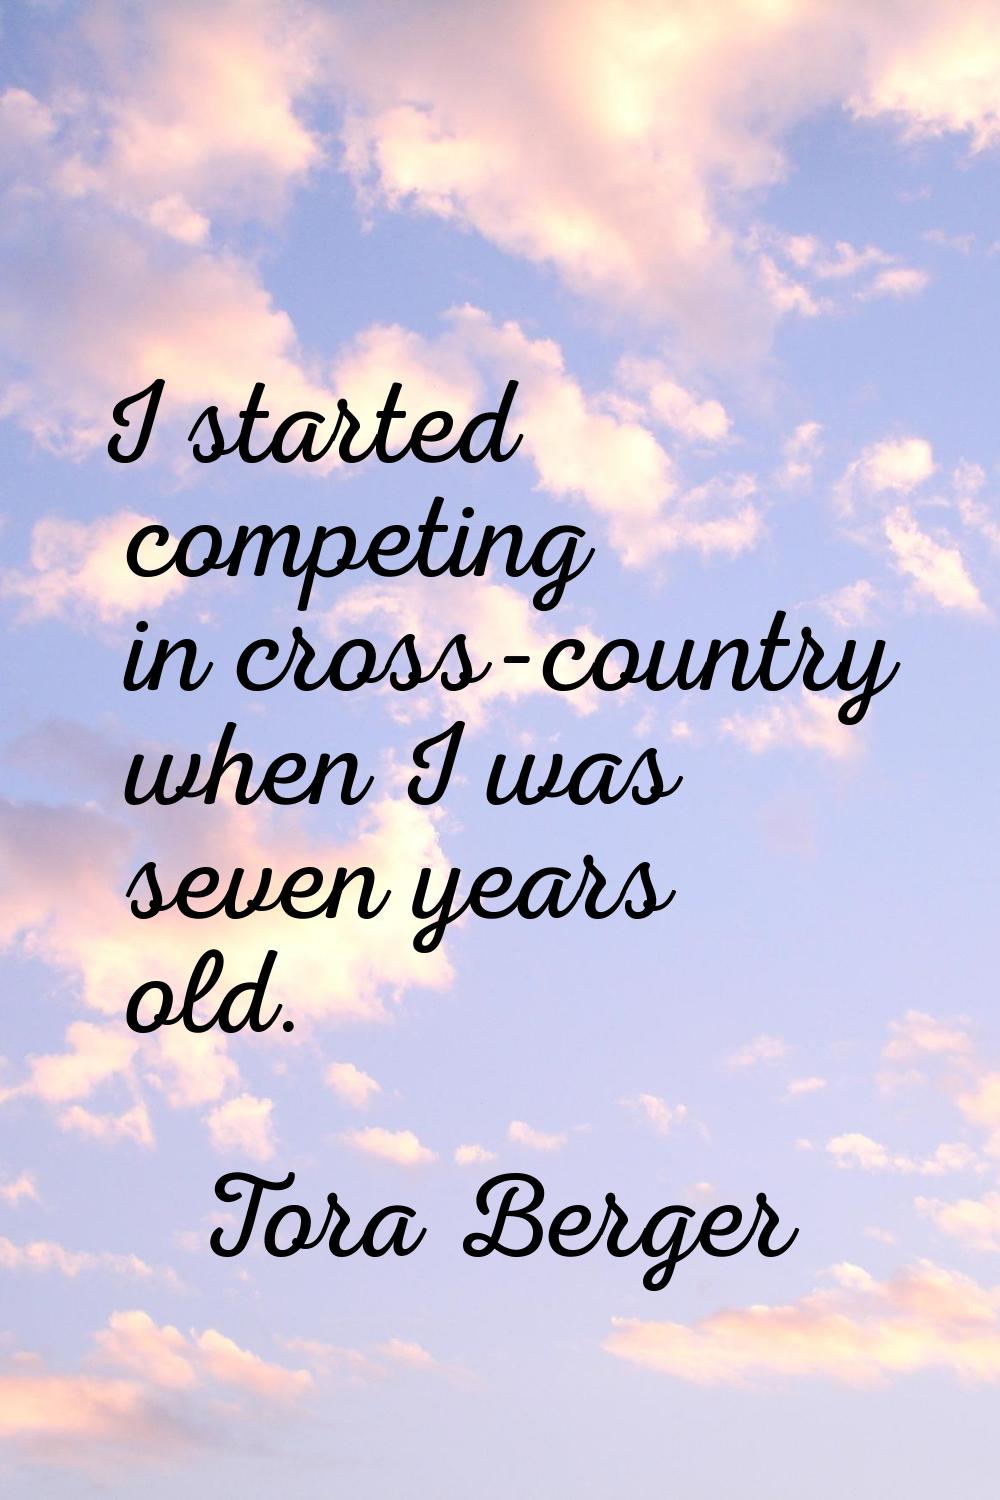 I started competing in cross-country when I was seven years old.